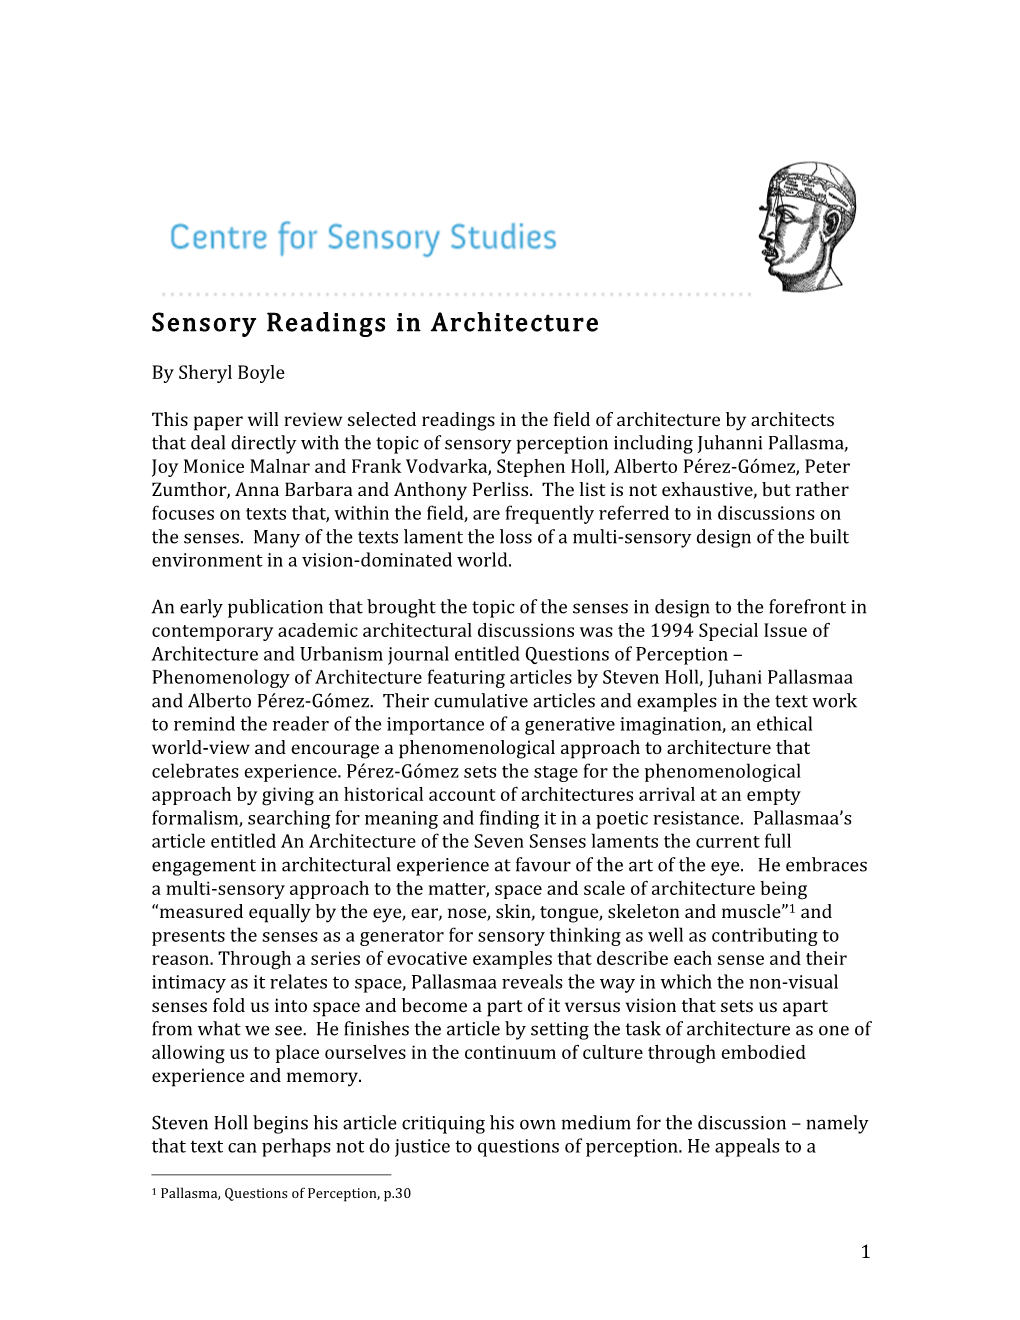 Sensory Readings in Architecture